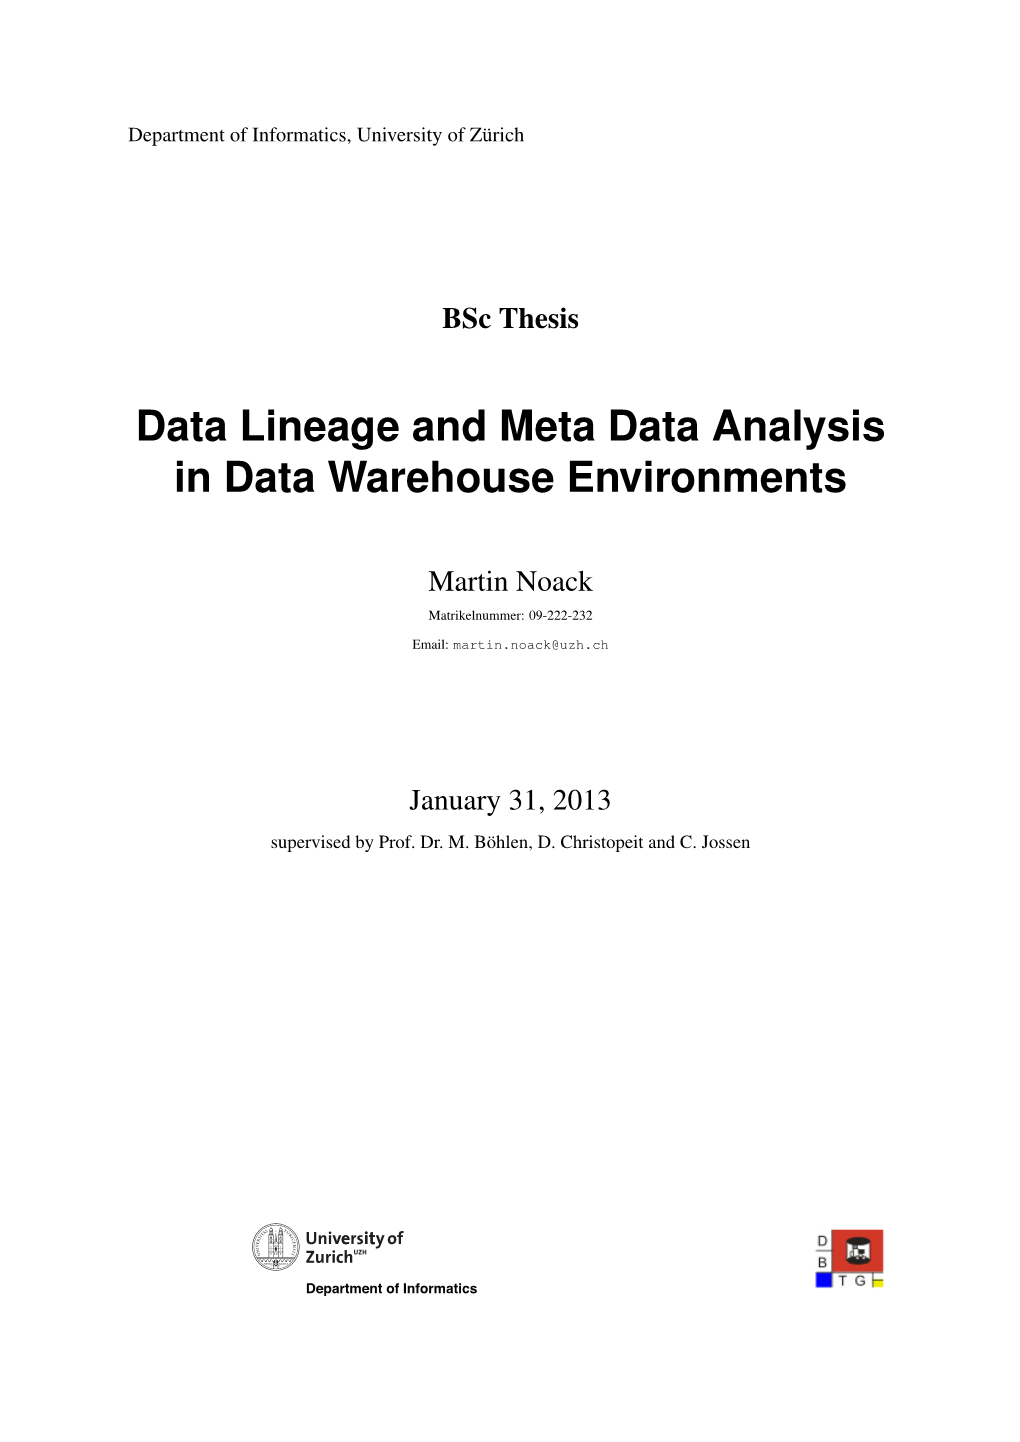 Data Lineage and Meta Data Analysis in Data Warehouse Environments